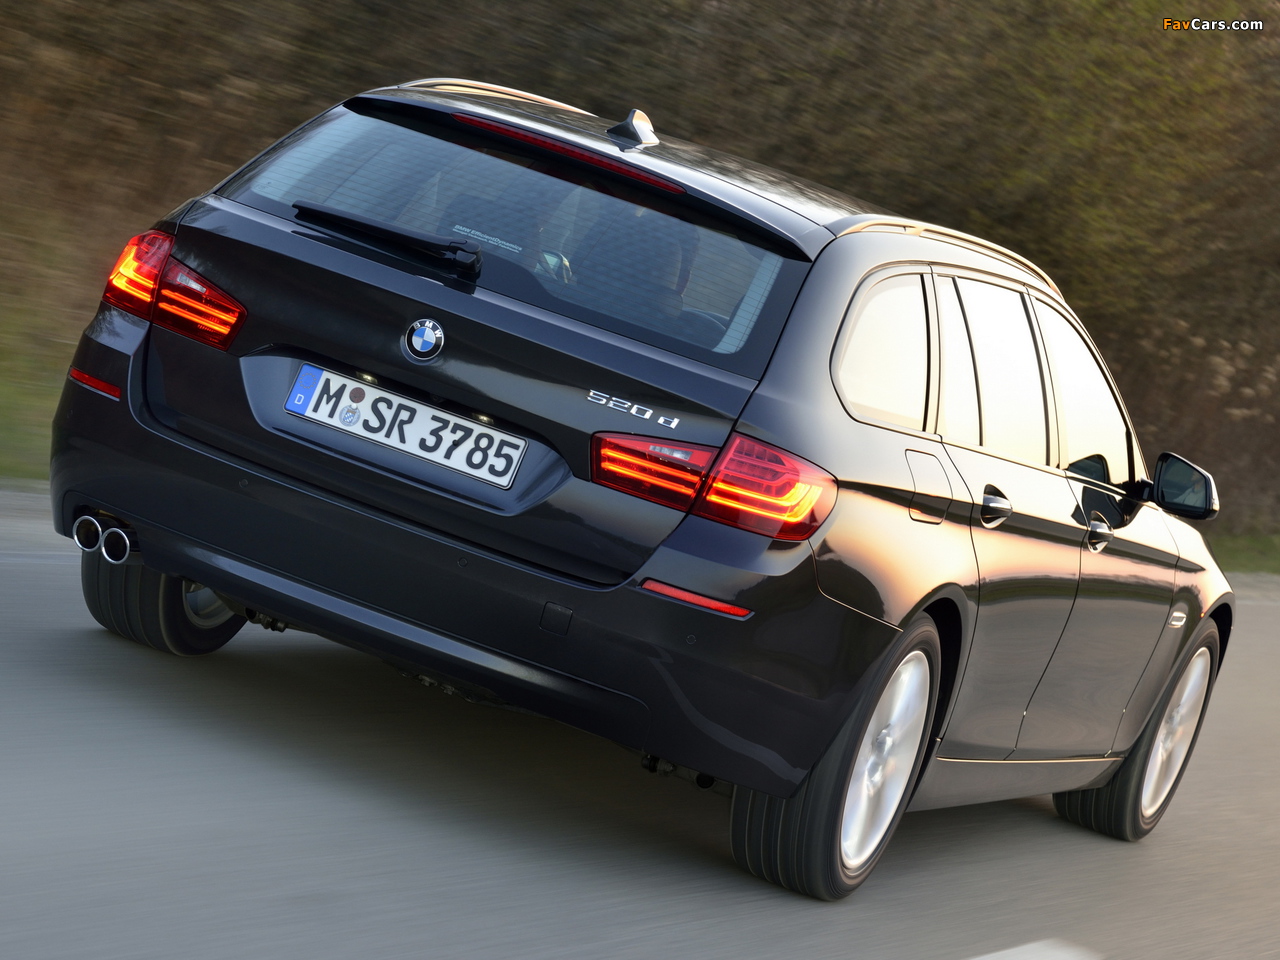 BMW 520d Touring (F11) 2013 images (1280 x 960)